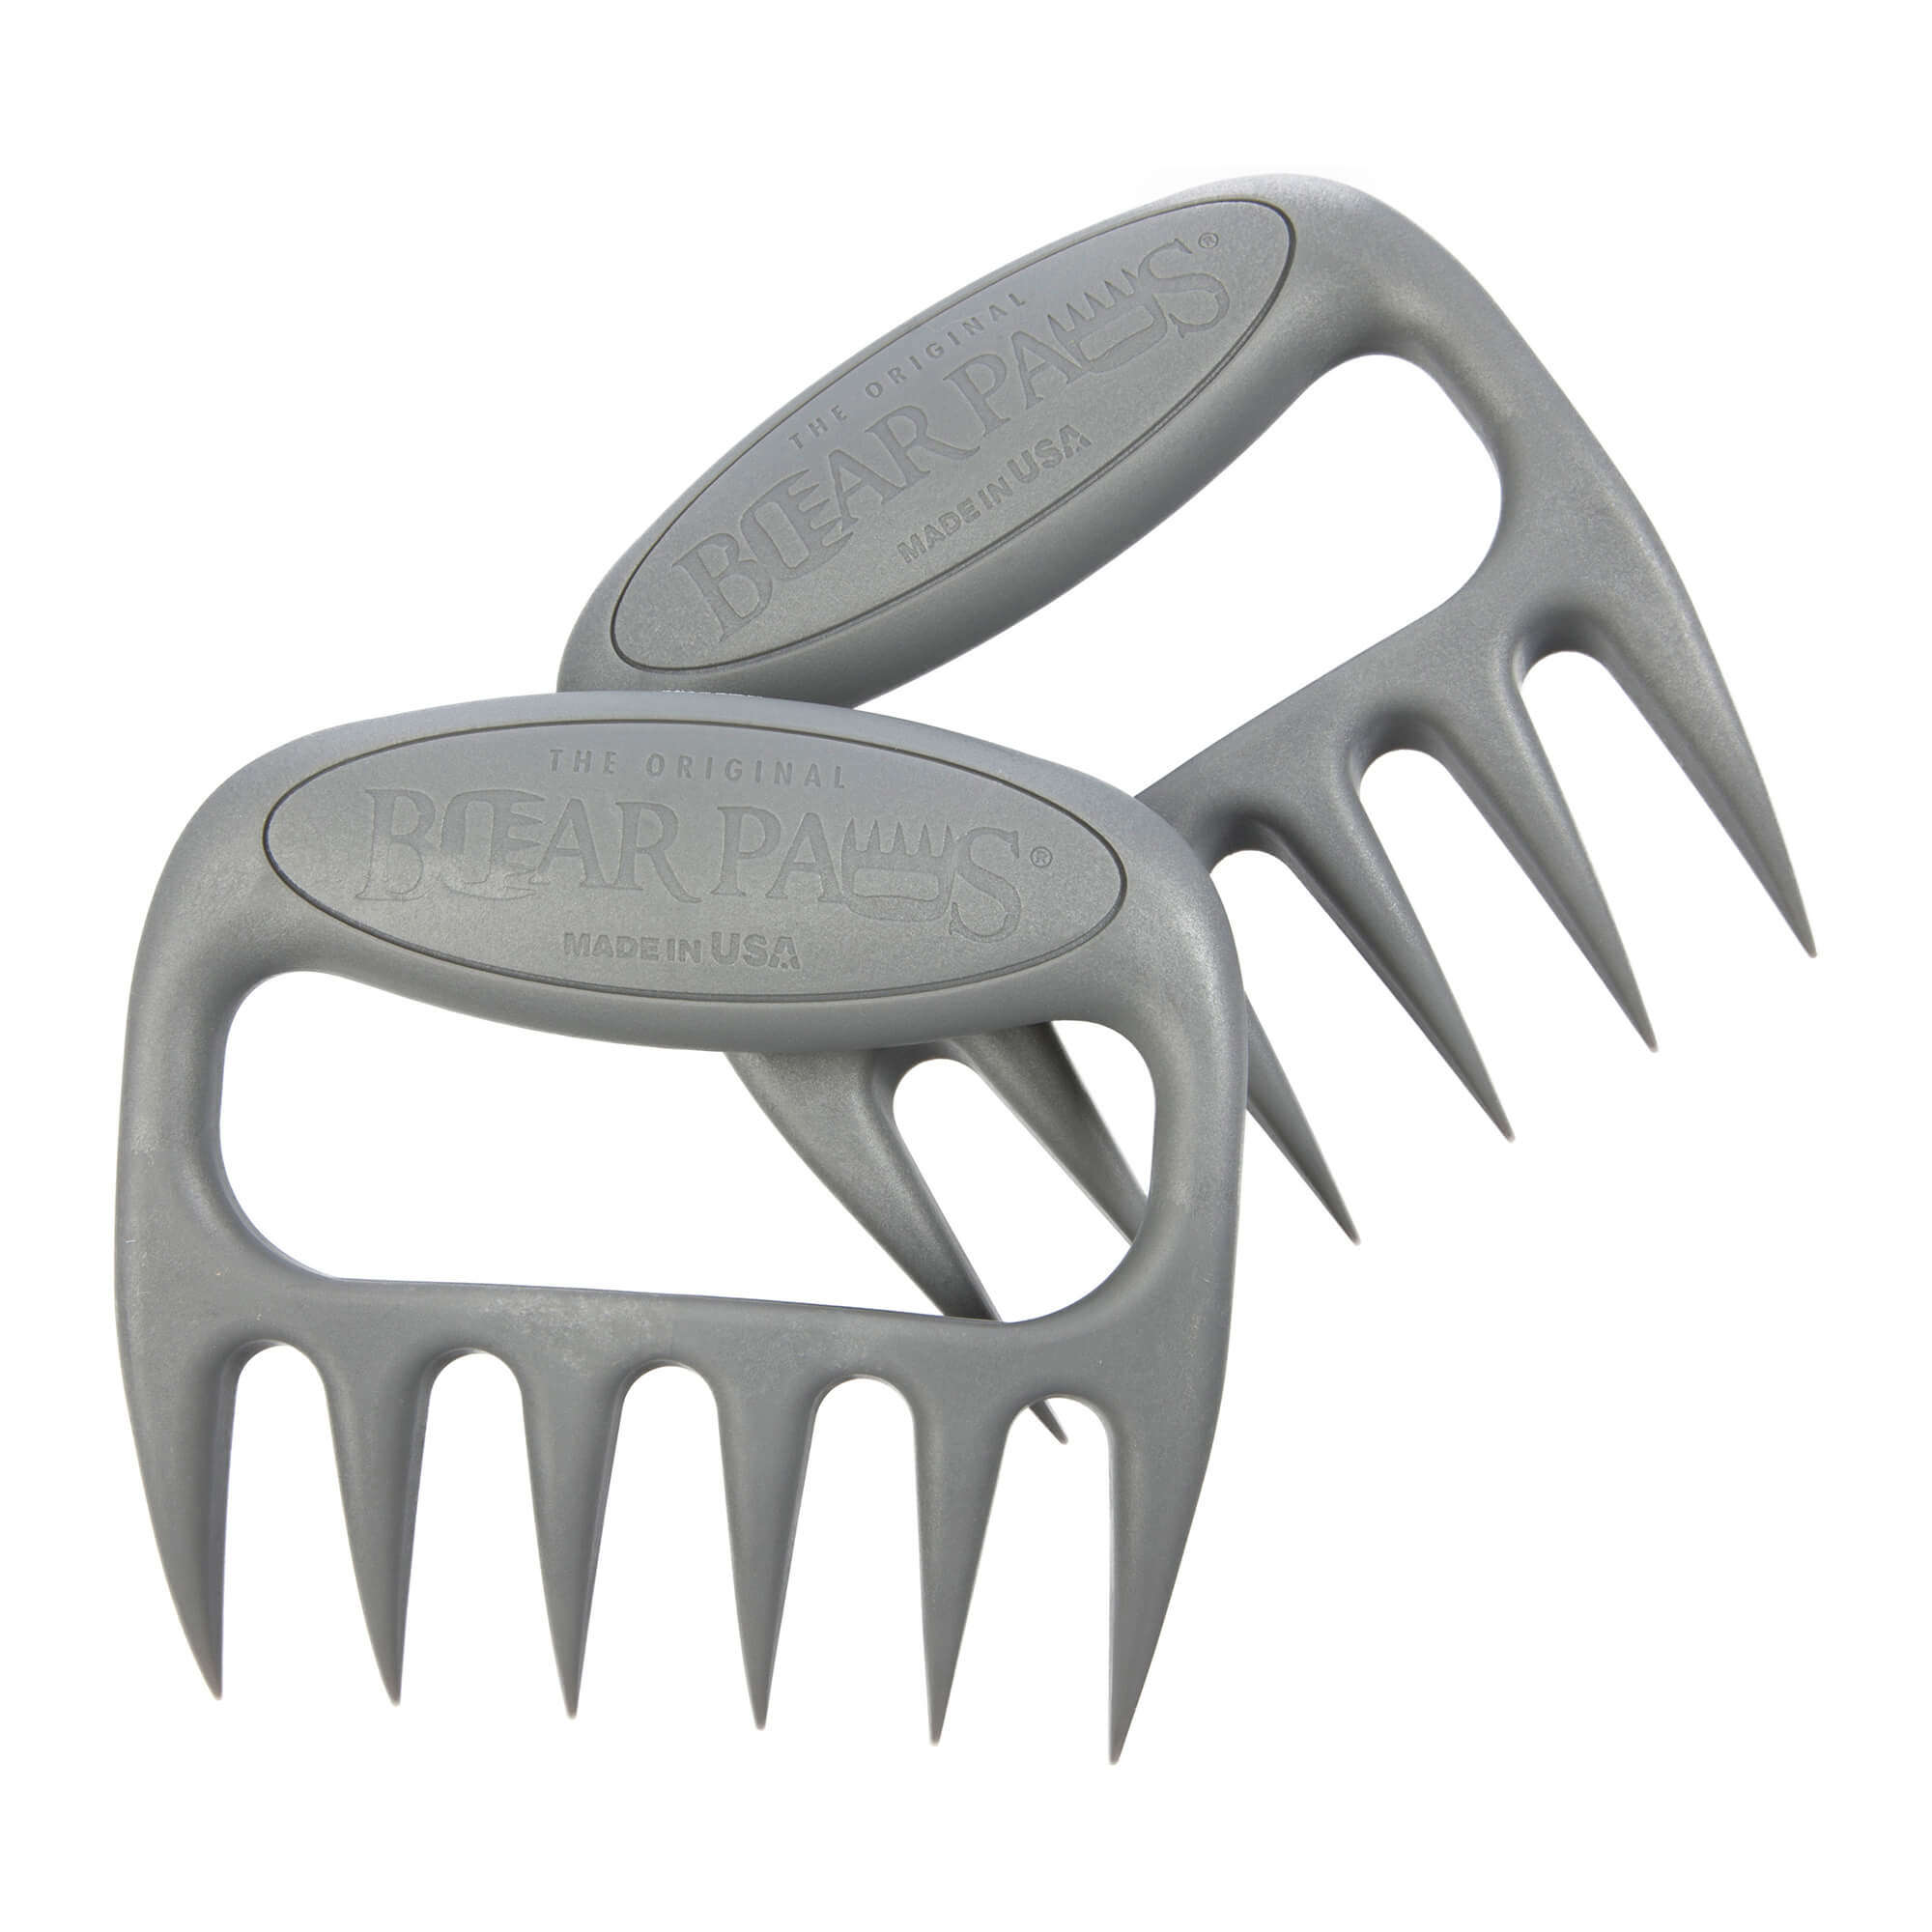 Bear Paws Meat Shredder Claws – Home Gadgets